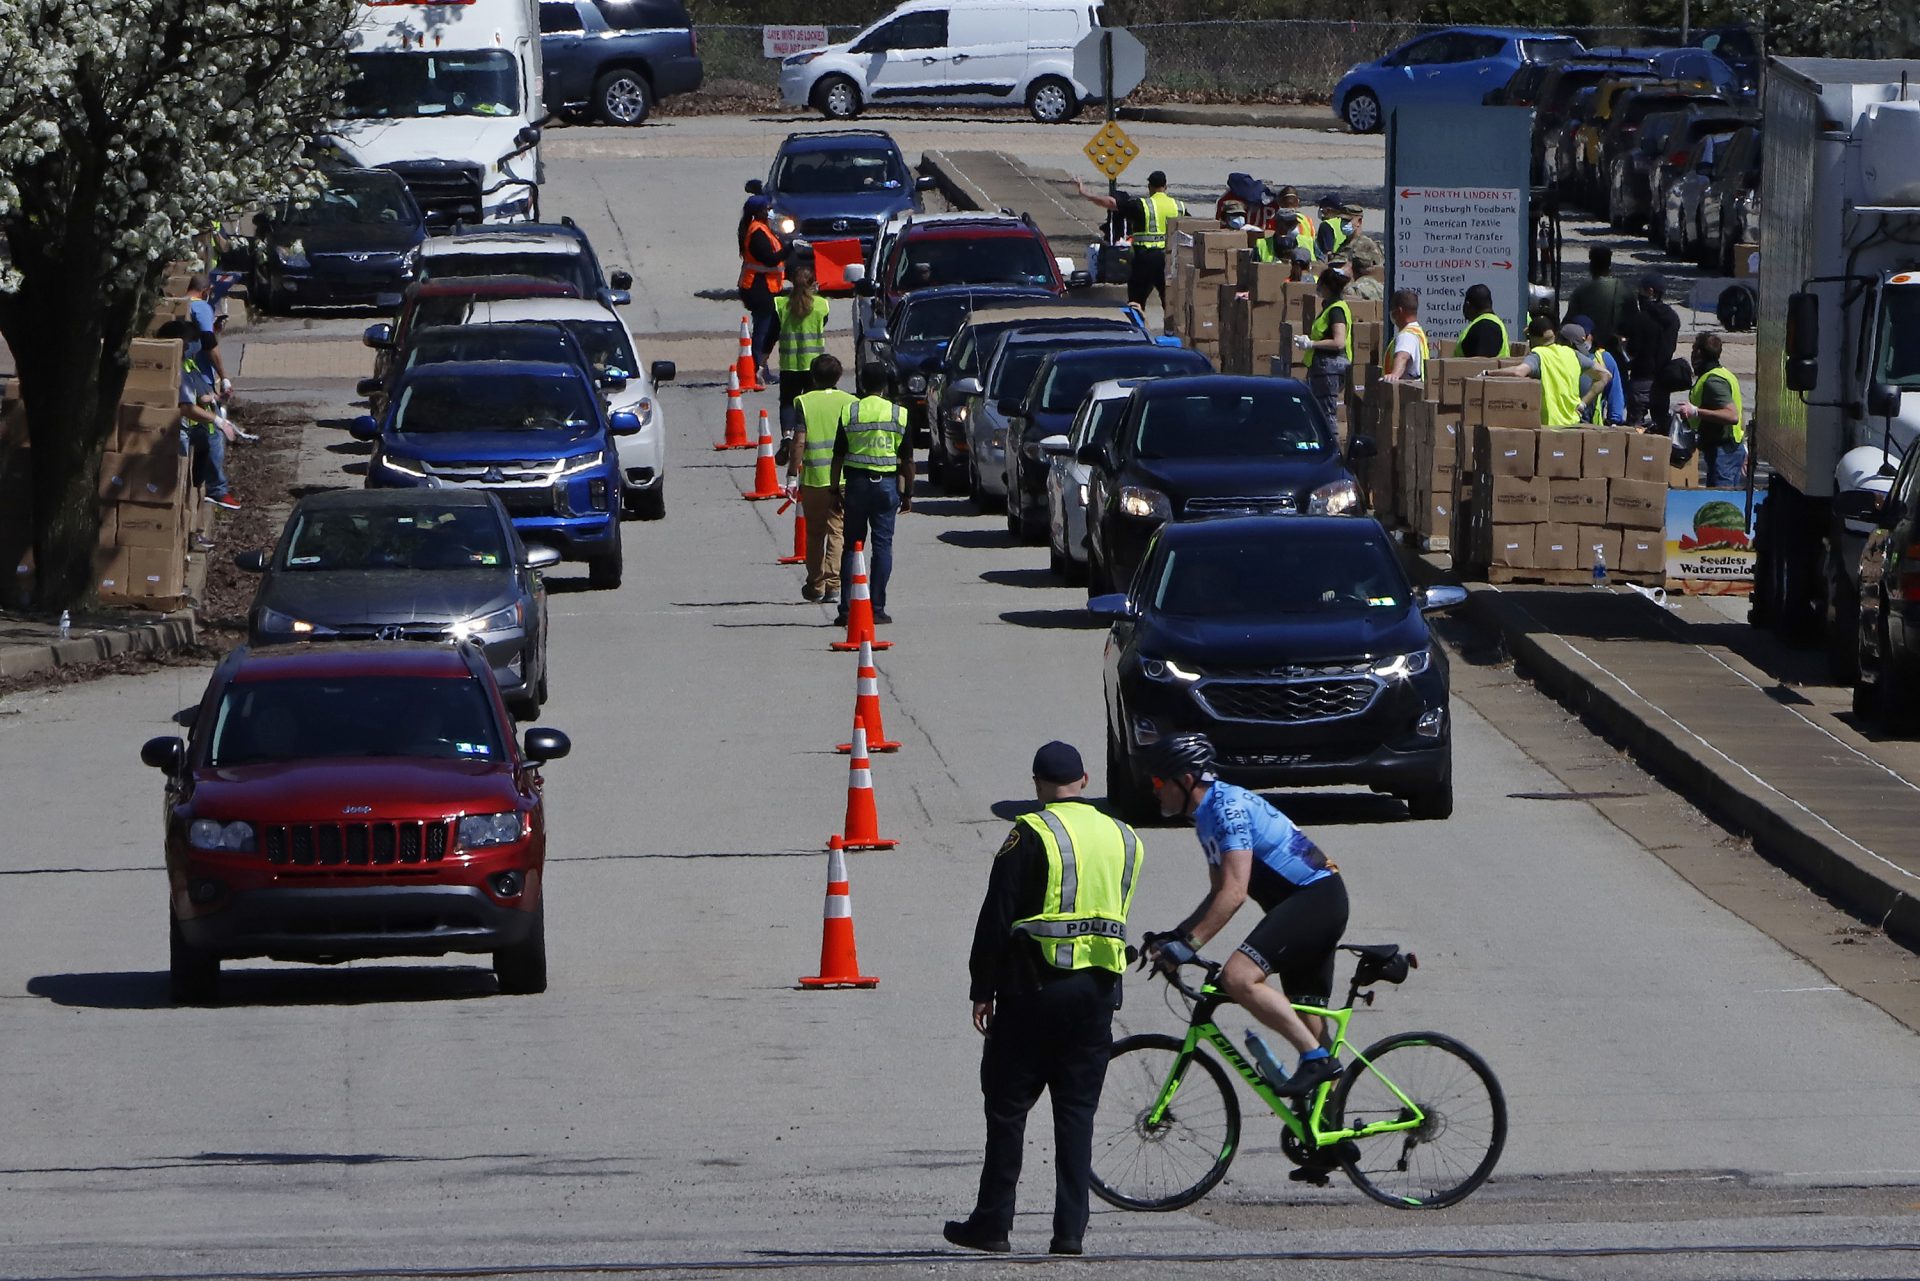 A double line of cars, stretching over a mile at times, are queued waiting as volunteers load food into vehicles outside the Greater Pittsburgh Community Food Bank in Duquesne, Pa., Monday, April 6, 2020. The COVID-19 pandemic has triggered a 543% increase in people coming to the food bank directly for food, according to the food bank's website.